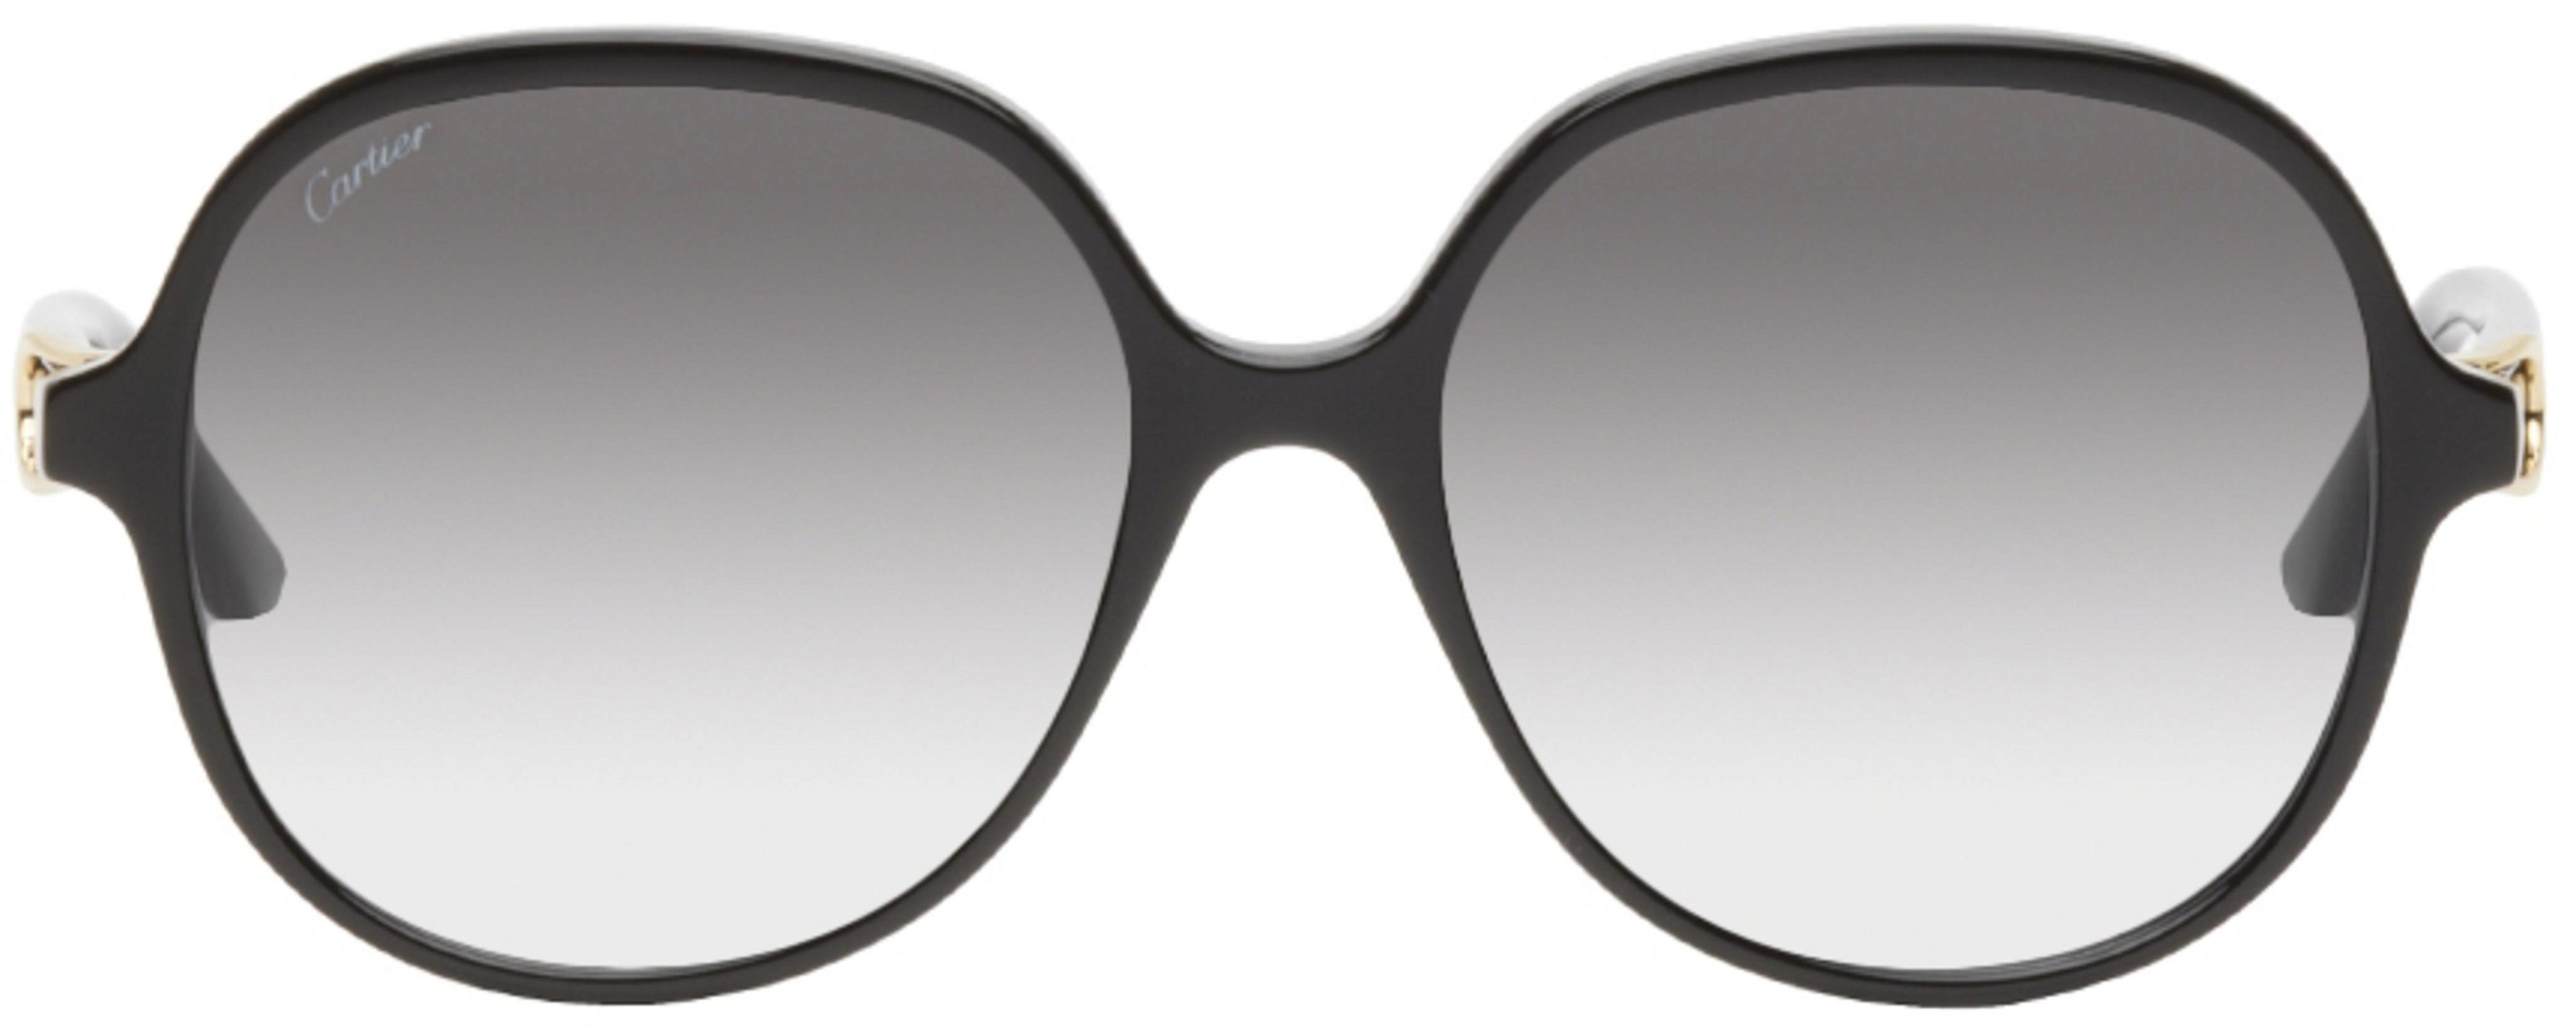 Black Round Sunglasses by CARTIER